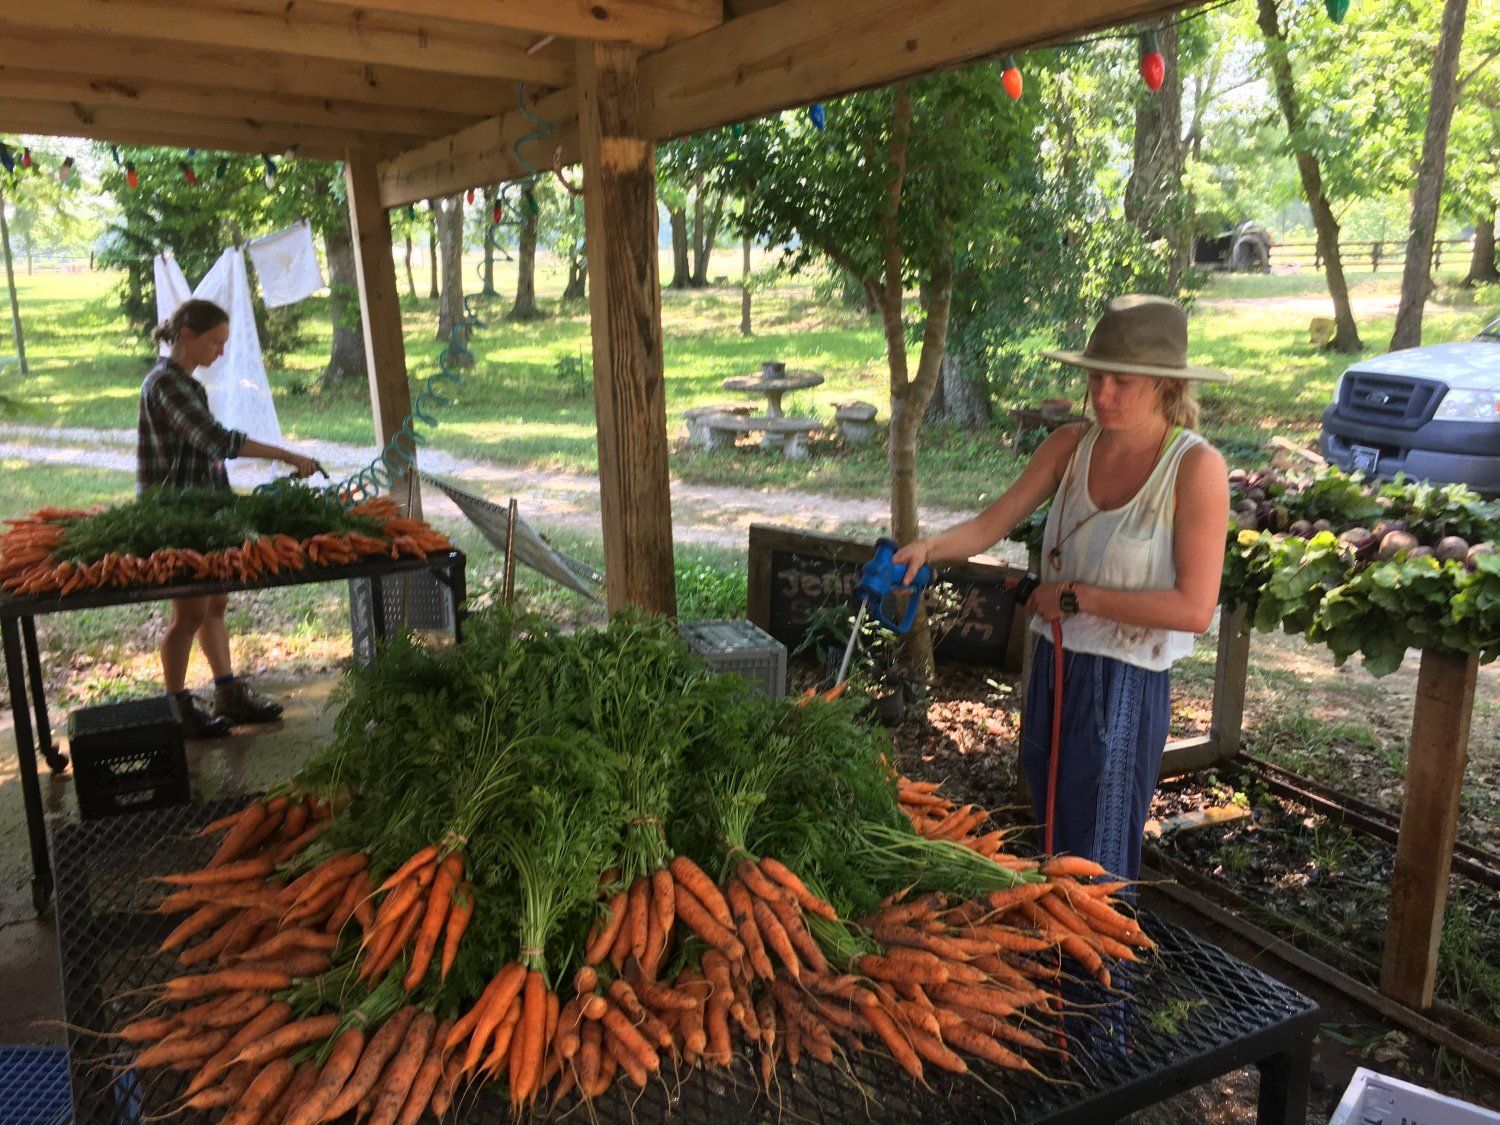 Previous Happening: Farm Happenings for May 27, 2021